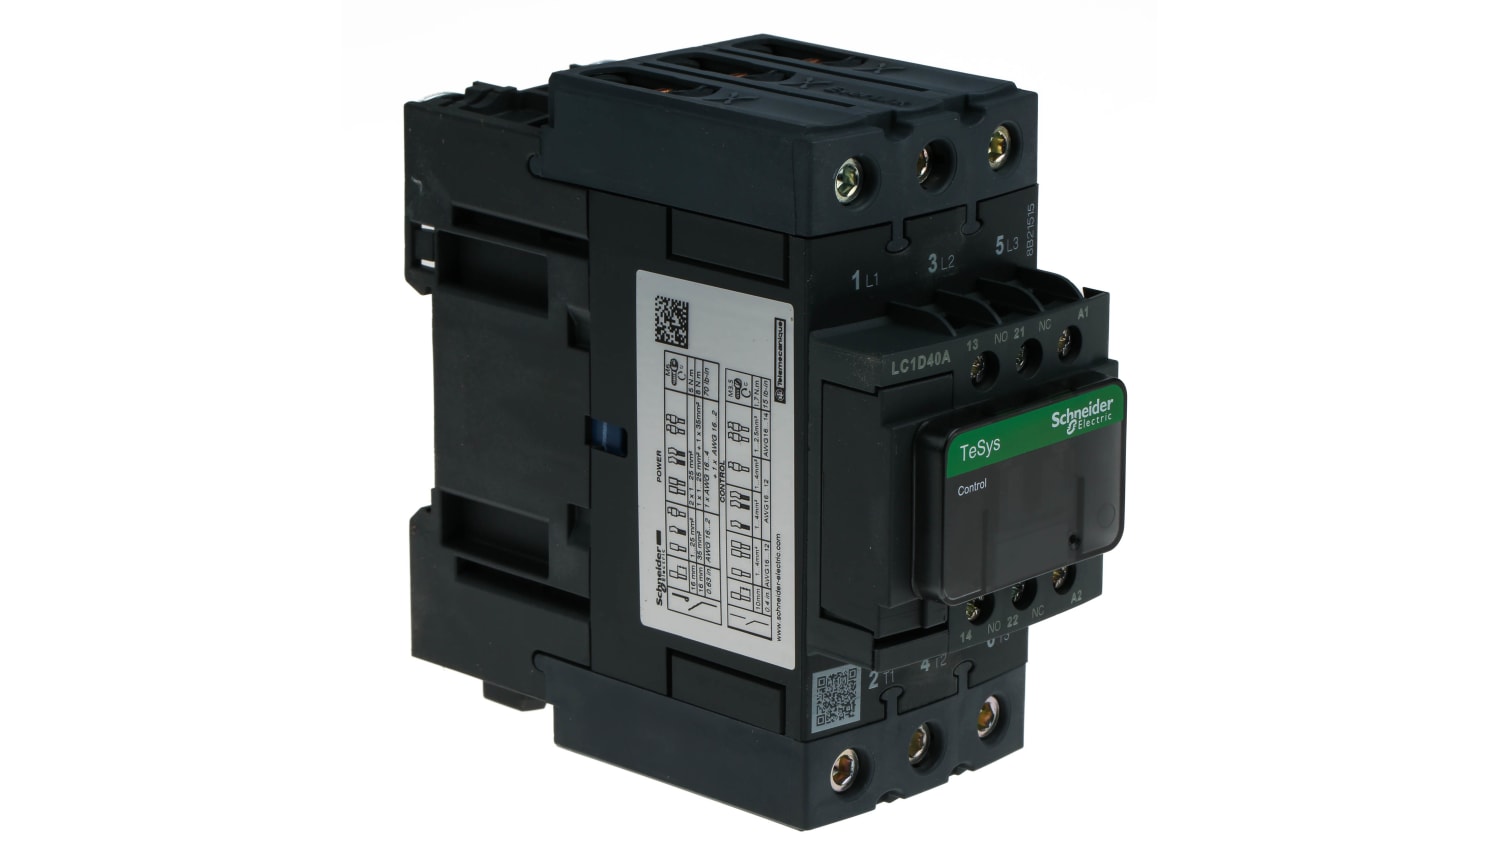 Schneider Electric LC1D40AP7 TeSys D 40a Contactor for sale online 